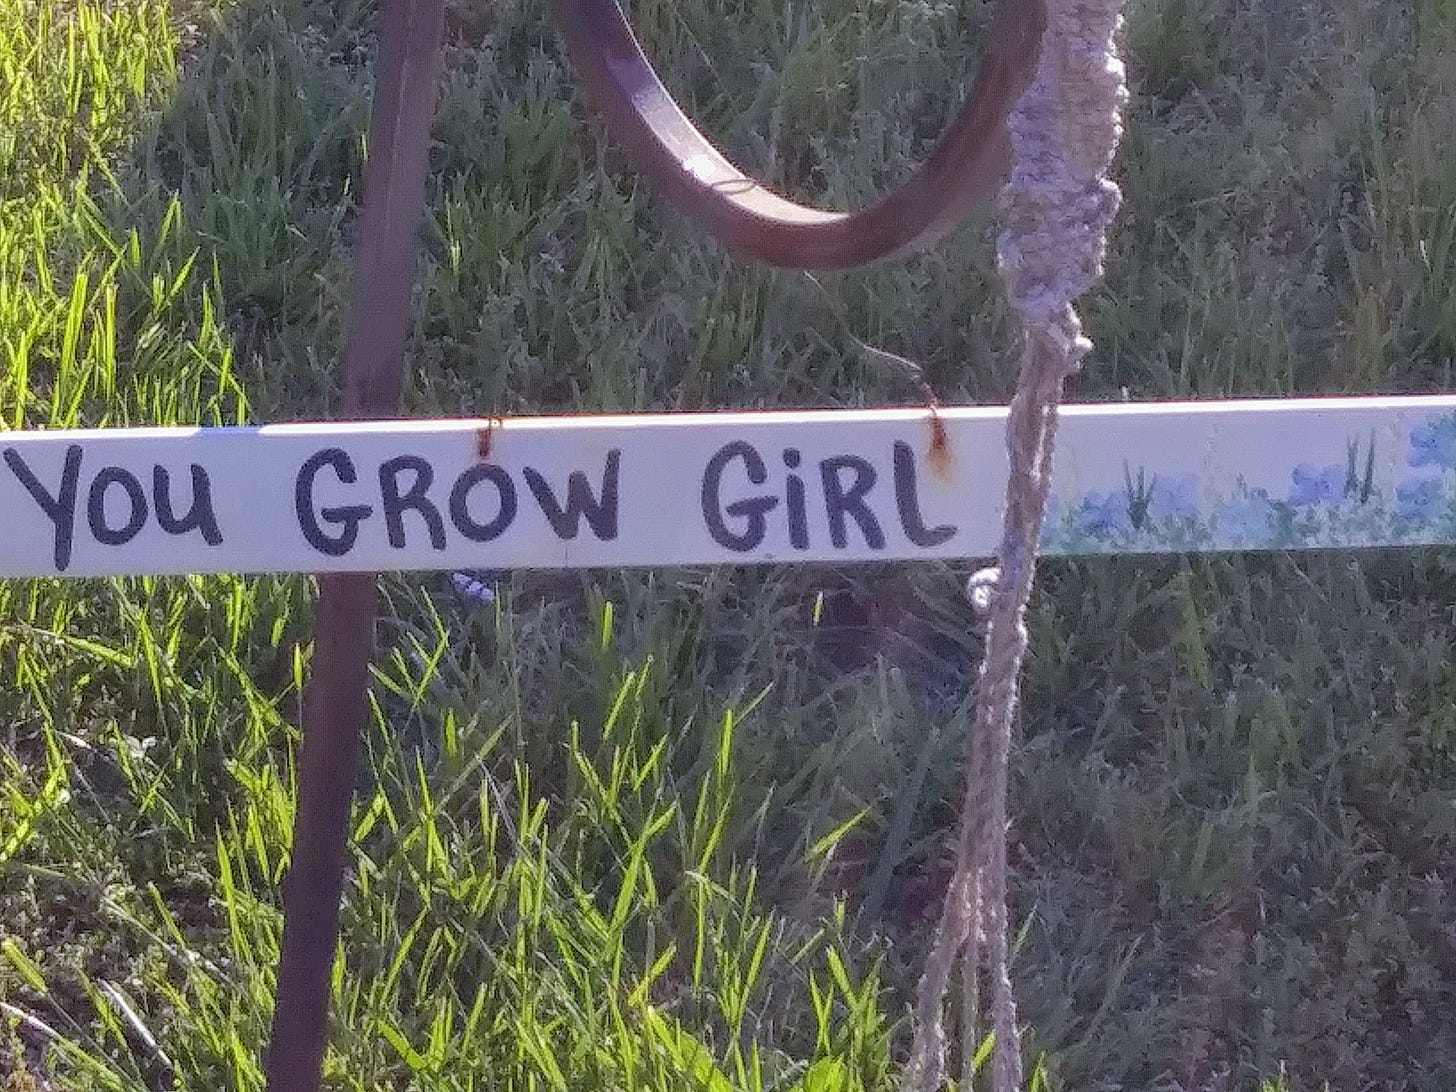 In the background, short green grass. In the foreground, a thin, rectangular sign says "You Grow Girl" in black writing. Blue flowers are on the far right of the sign. The sign hangs from stake.